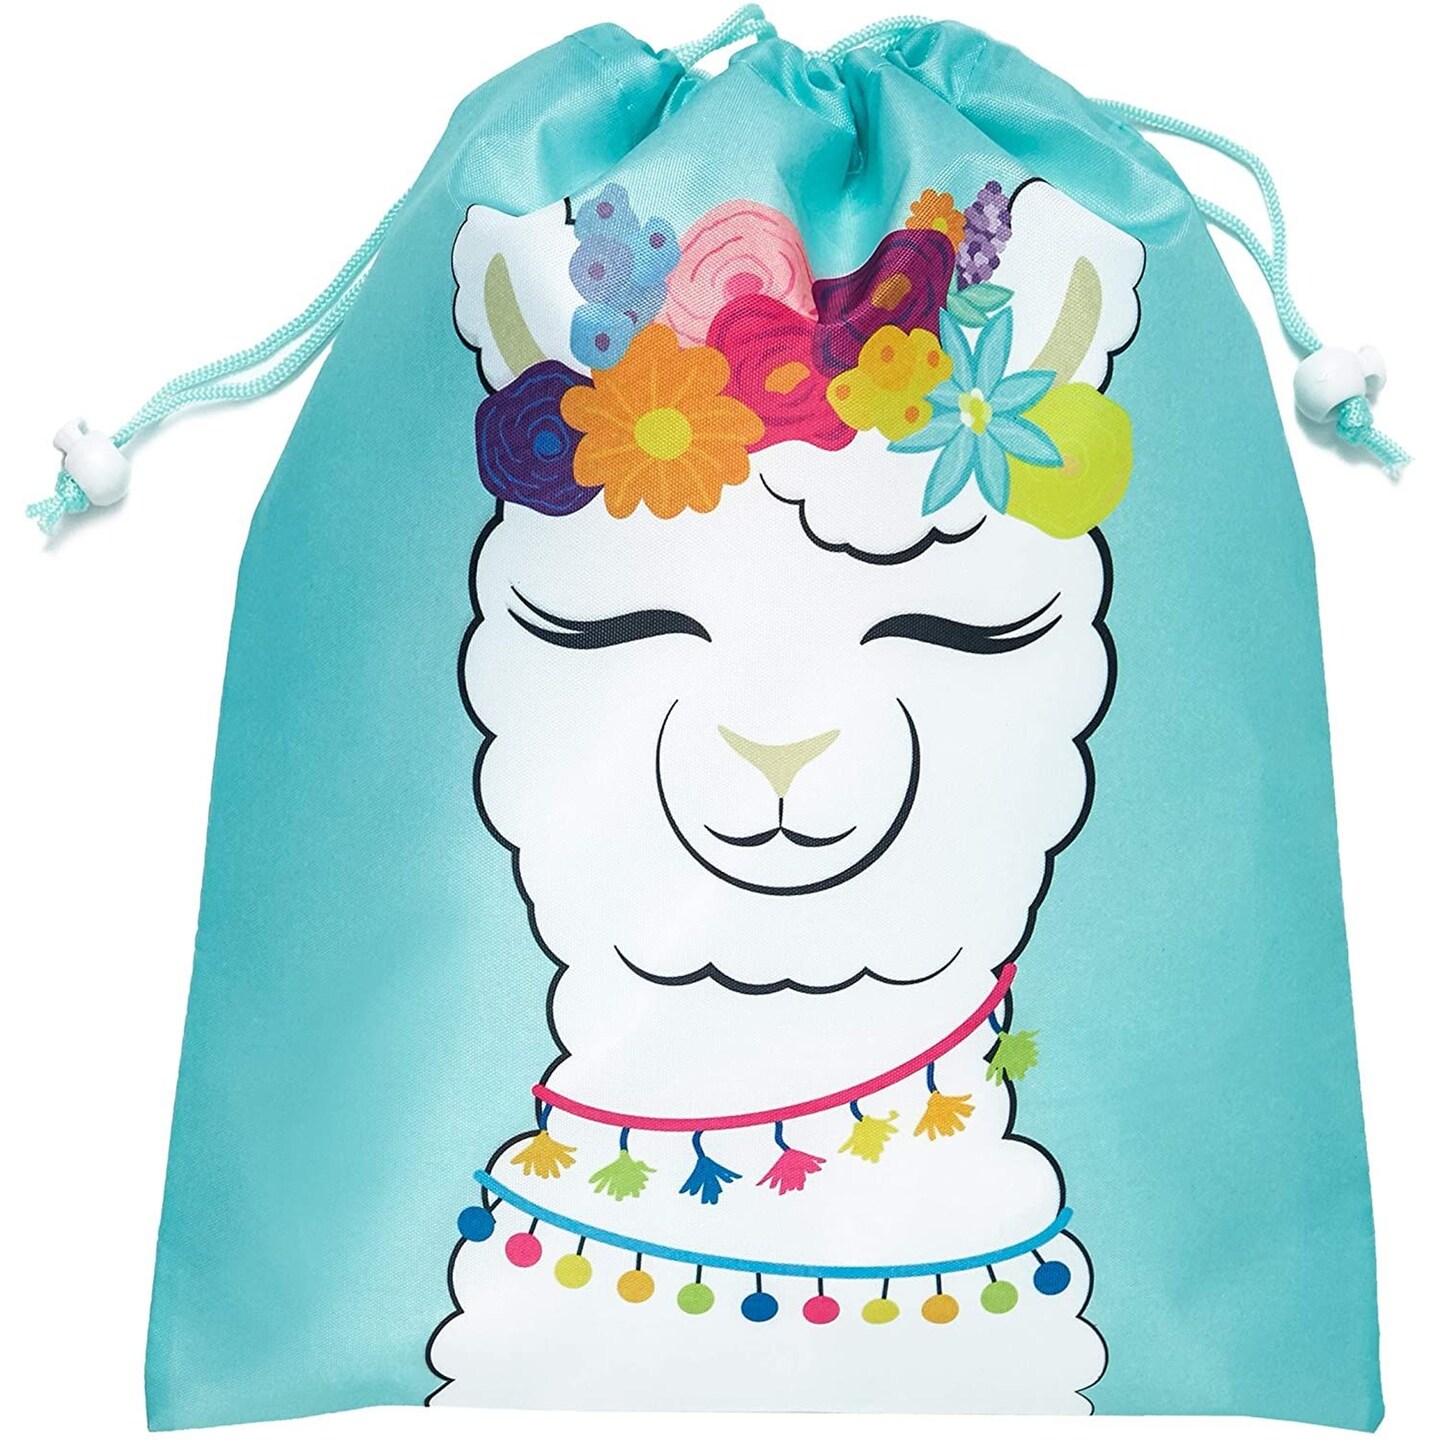 Cat Party Favor Bags for Kids Birthday Party (36 Pack) 